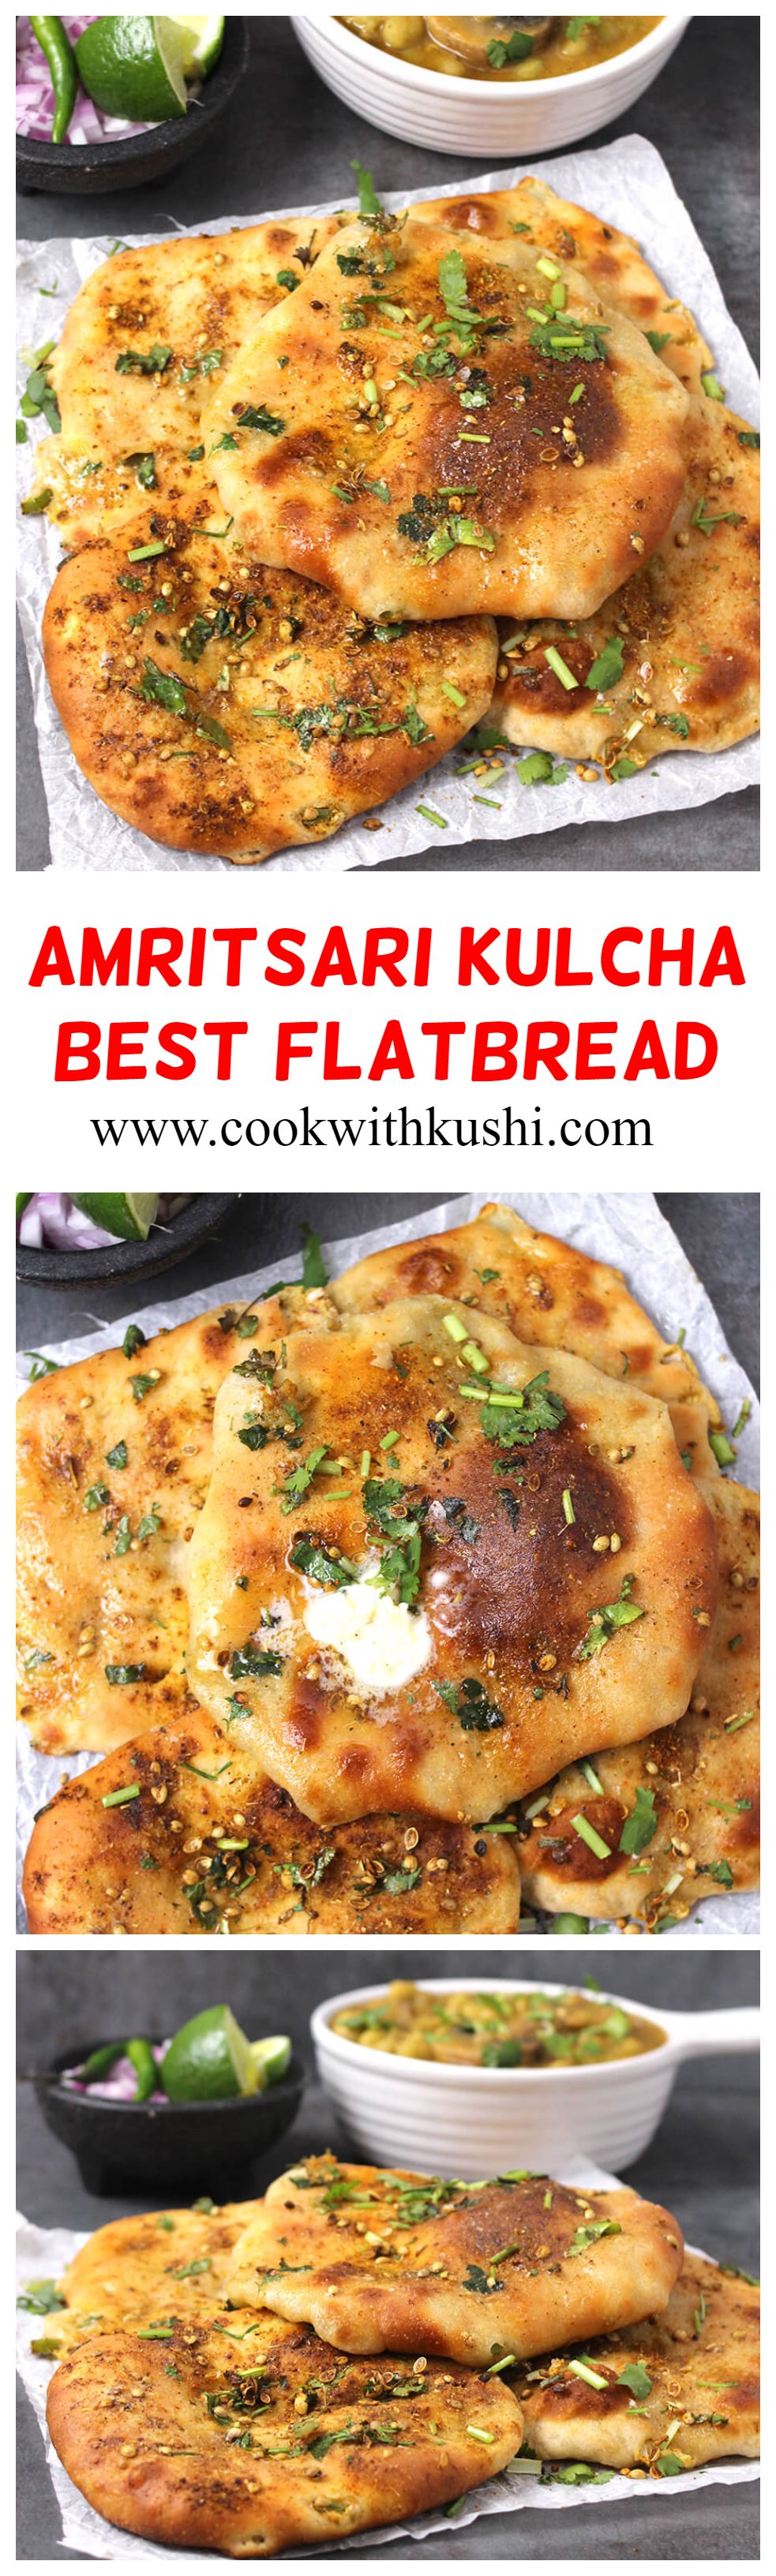 Amritsari Kulcha (Potato Kukcha or Naan) is a delicious flatbread that is crispy on the outside with melt in mouth texture from the inside and topped with aromatic spices. This is one of the best stuffed flat bread that you should not miss to try out.